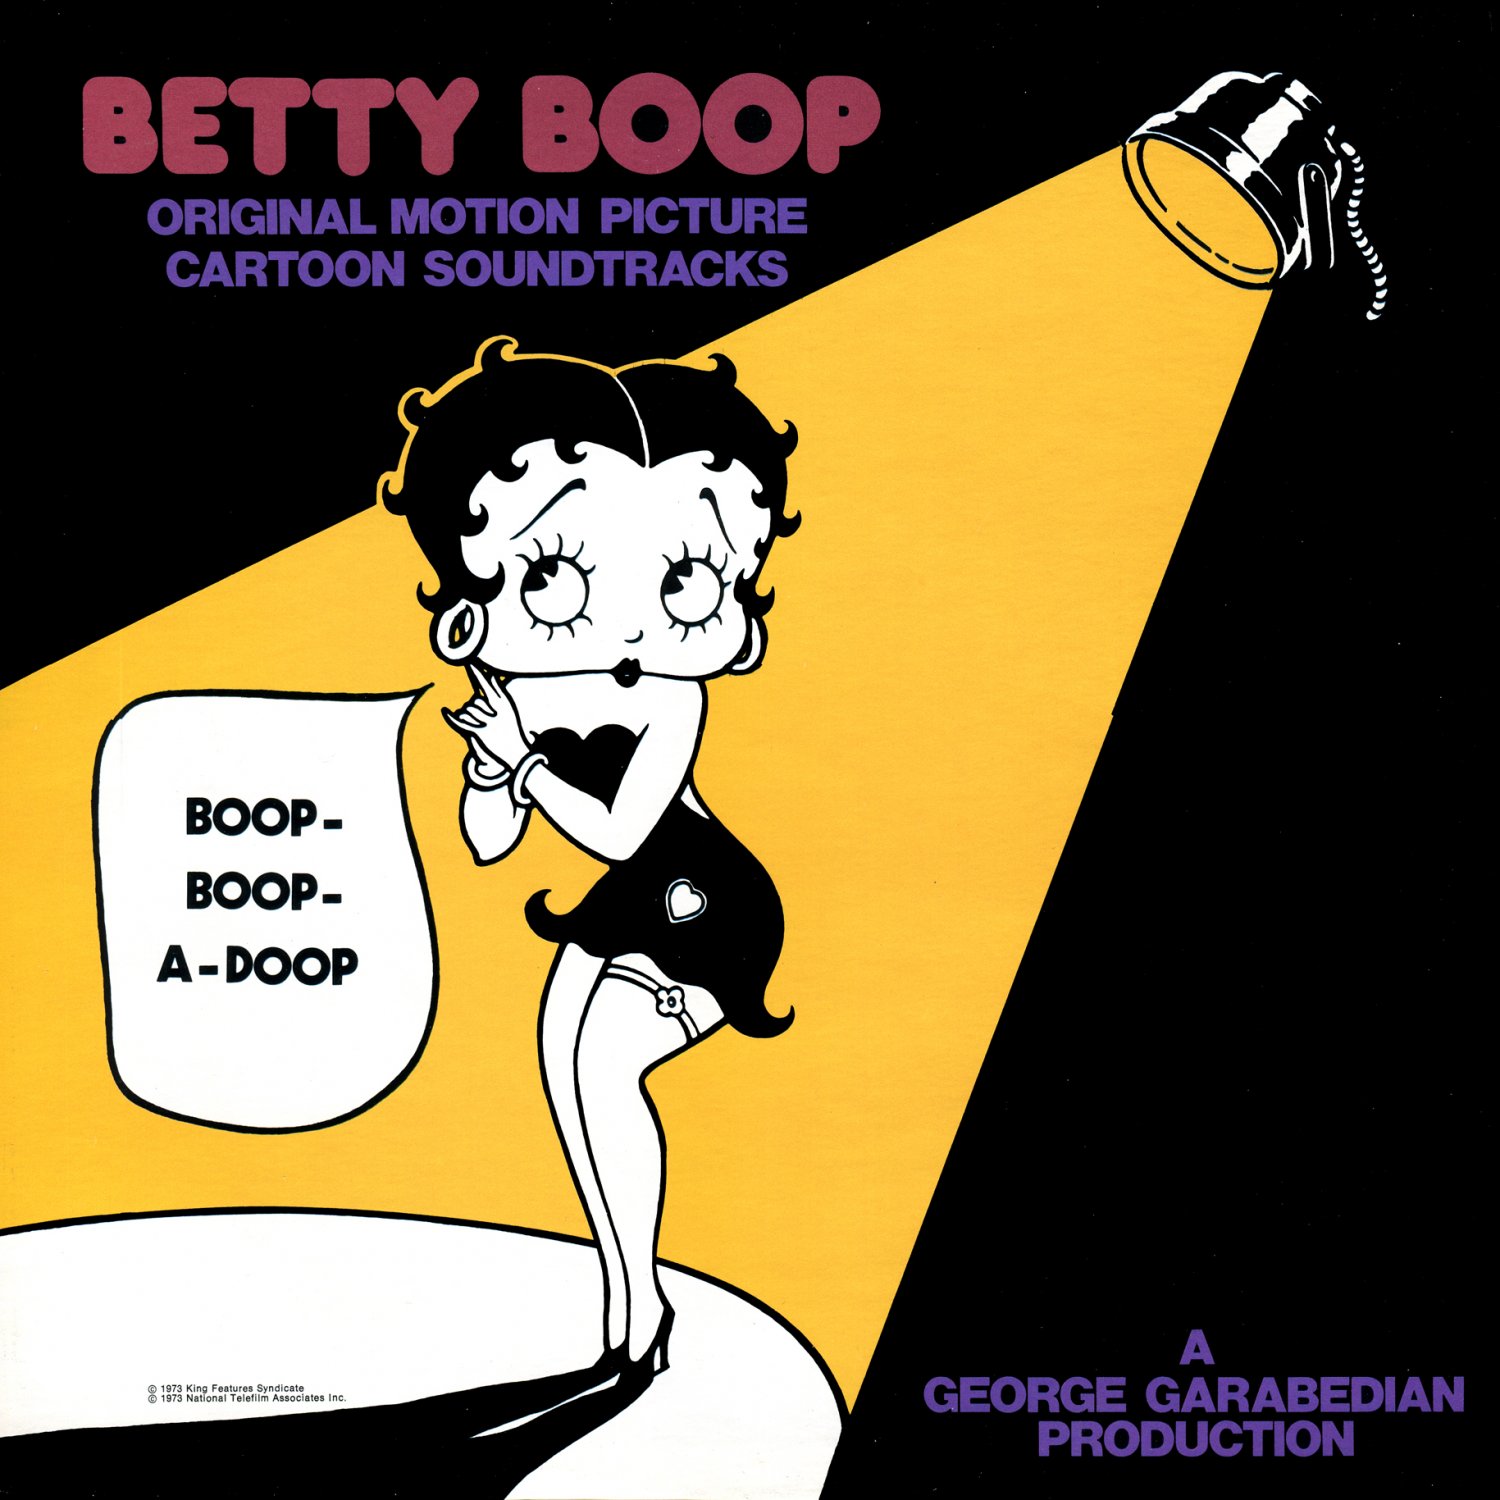 Why was betty boop banned